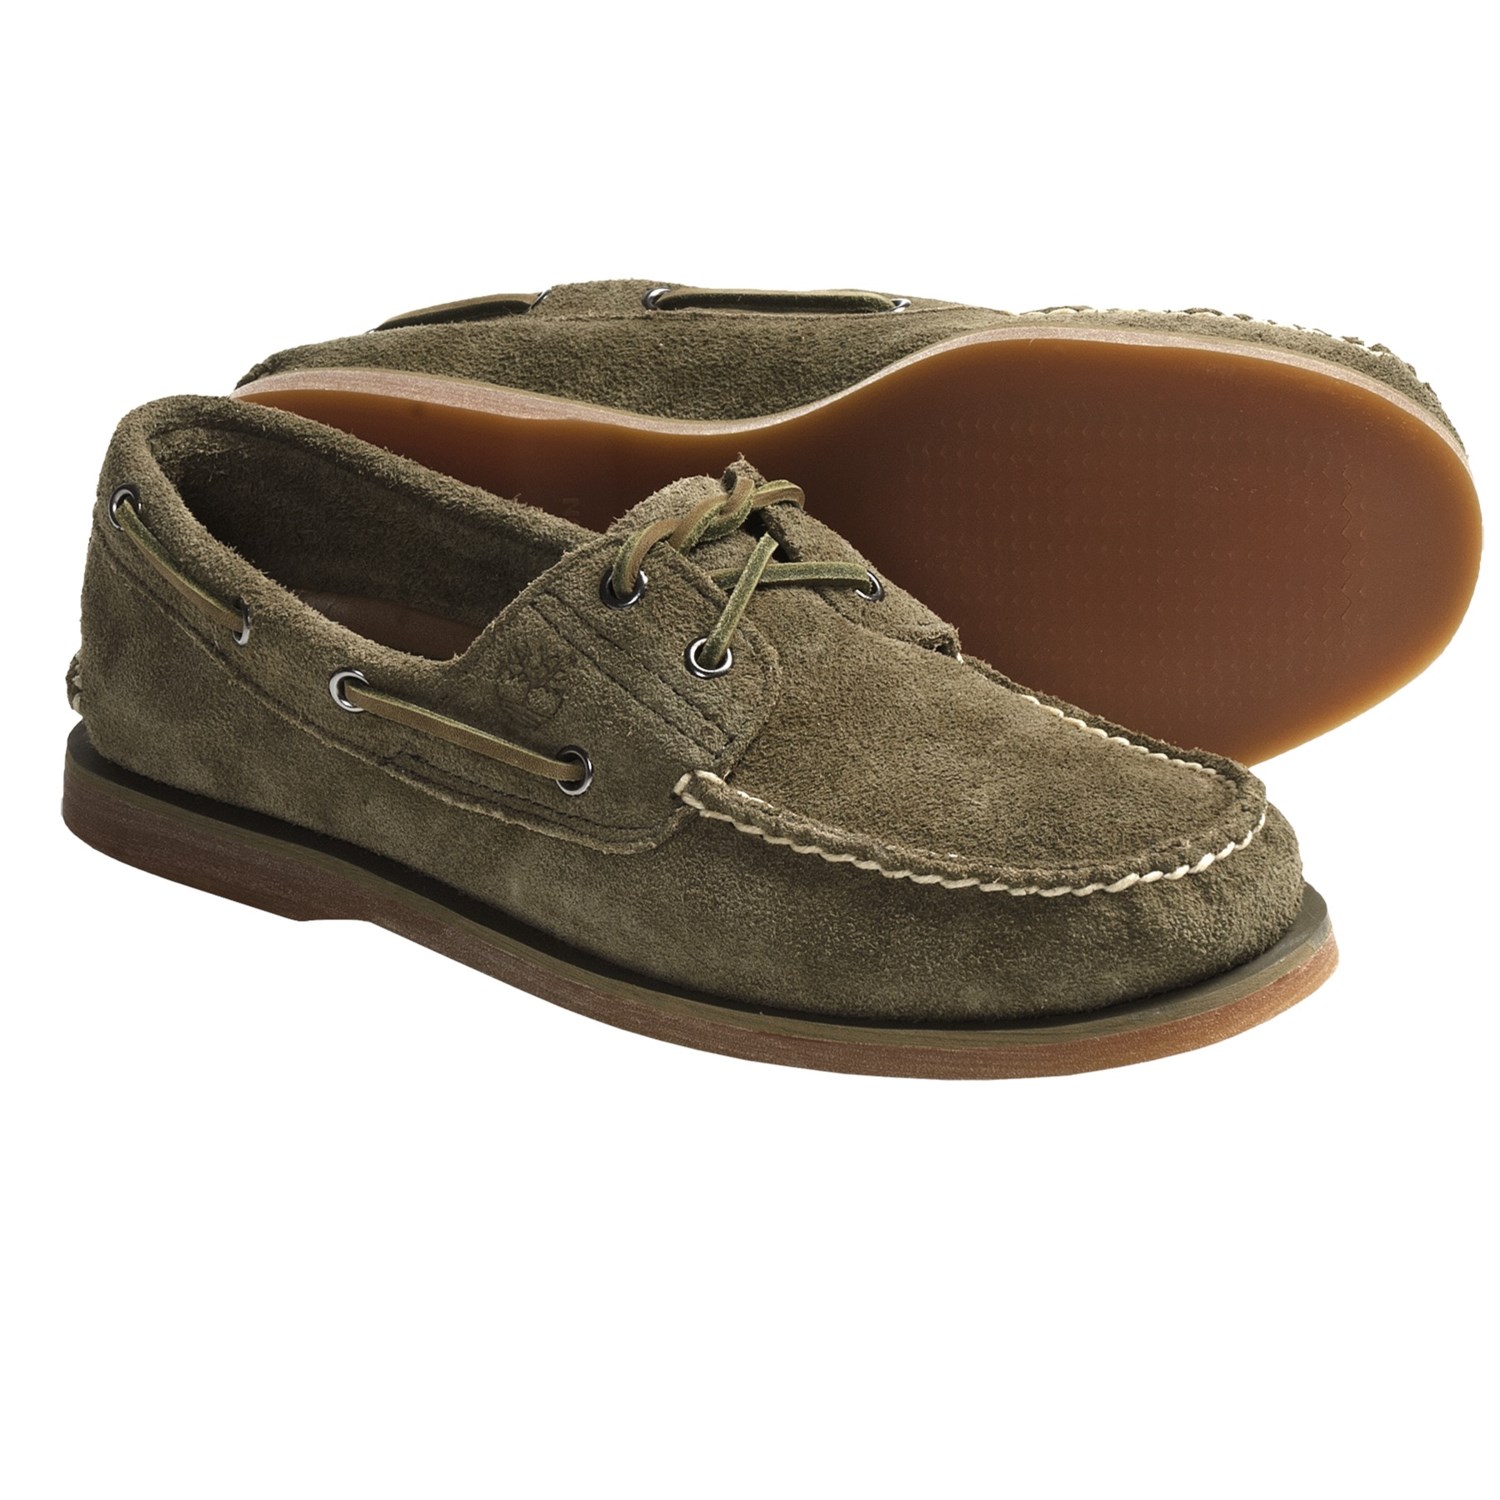 Timberland Classic 2-Eye Boat Shoes - Suede (For Men) - Save 44%